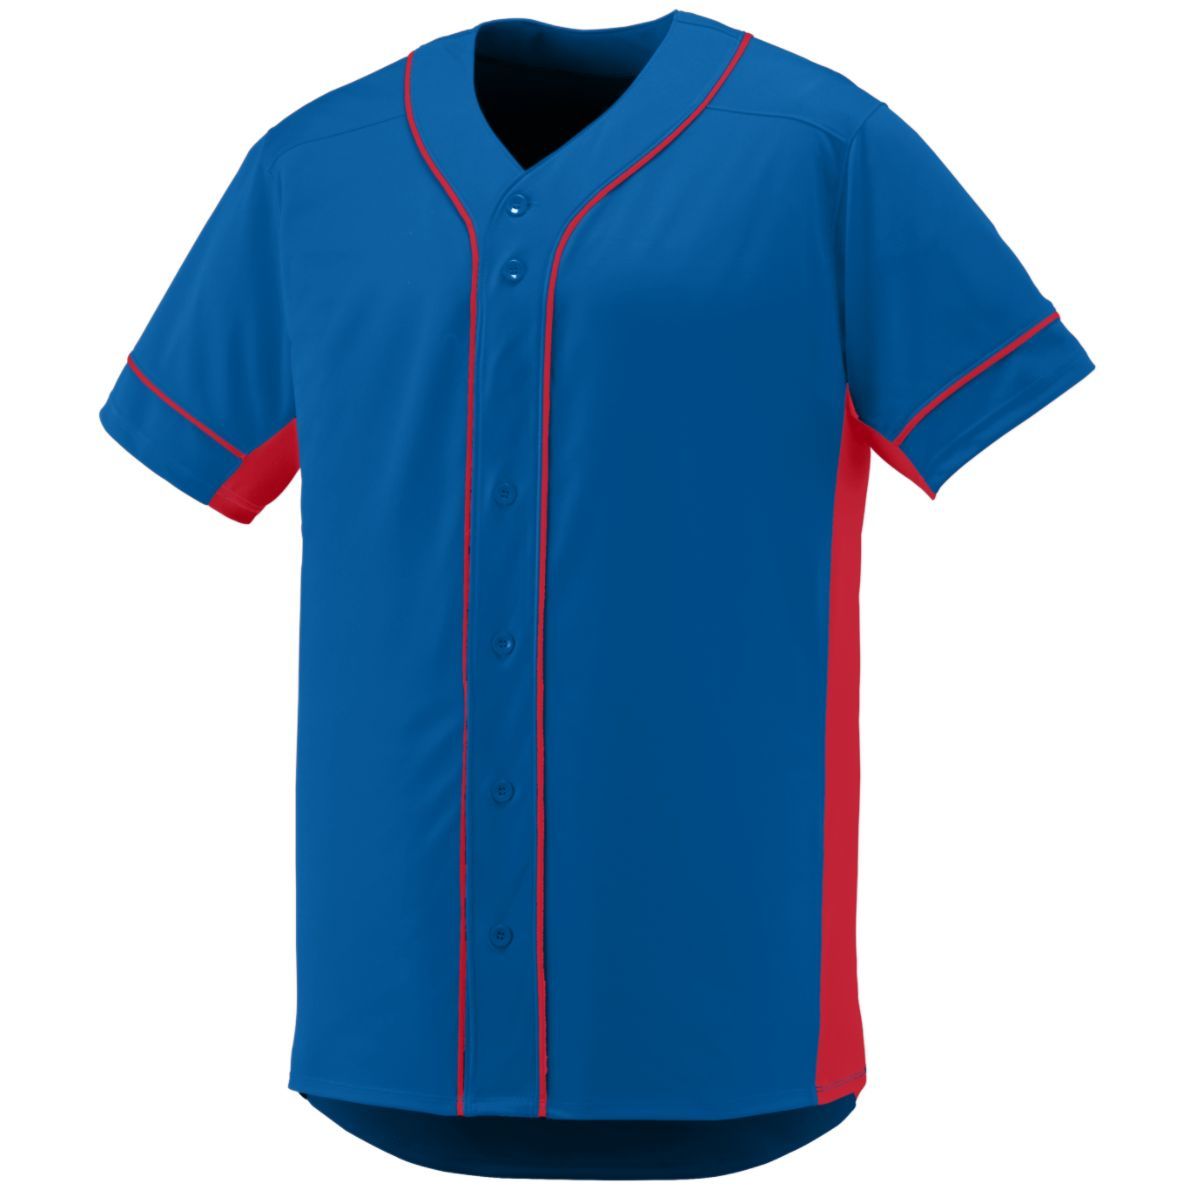 Augusta Sportswear Youth Slugger Jersey in Royal/Red  -Part of the Youth, Youth-Jersey, Augusta-Products, Baseball, Shirts, All-Sports, All-Sports-1 product lines at KanaleyCreations.com